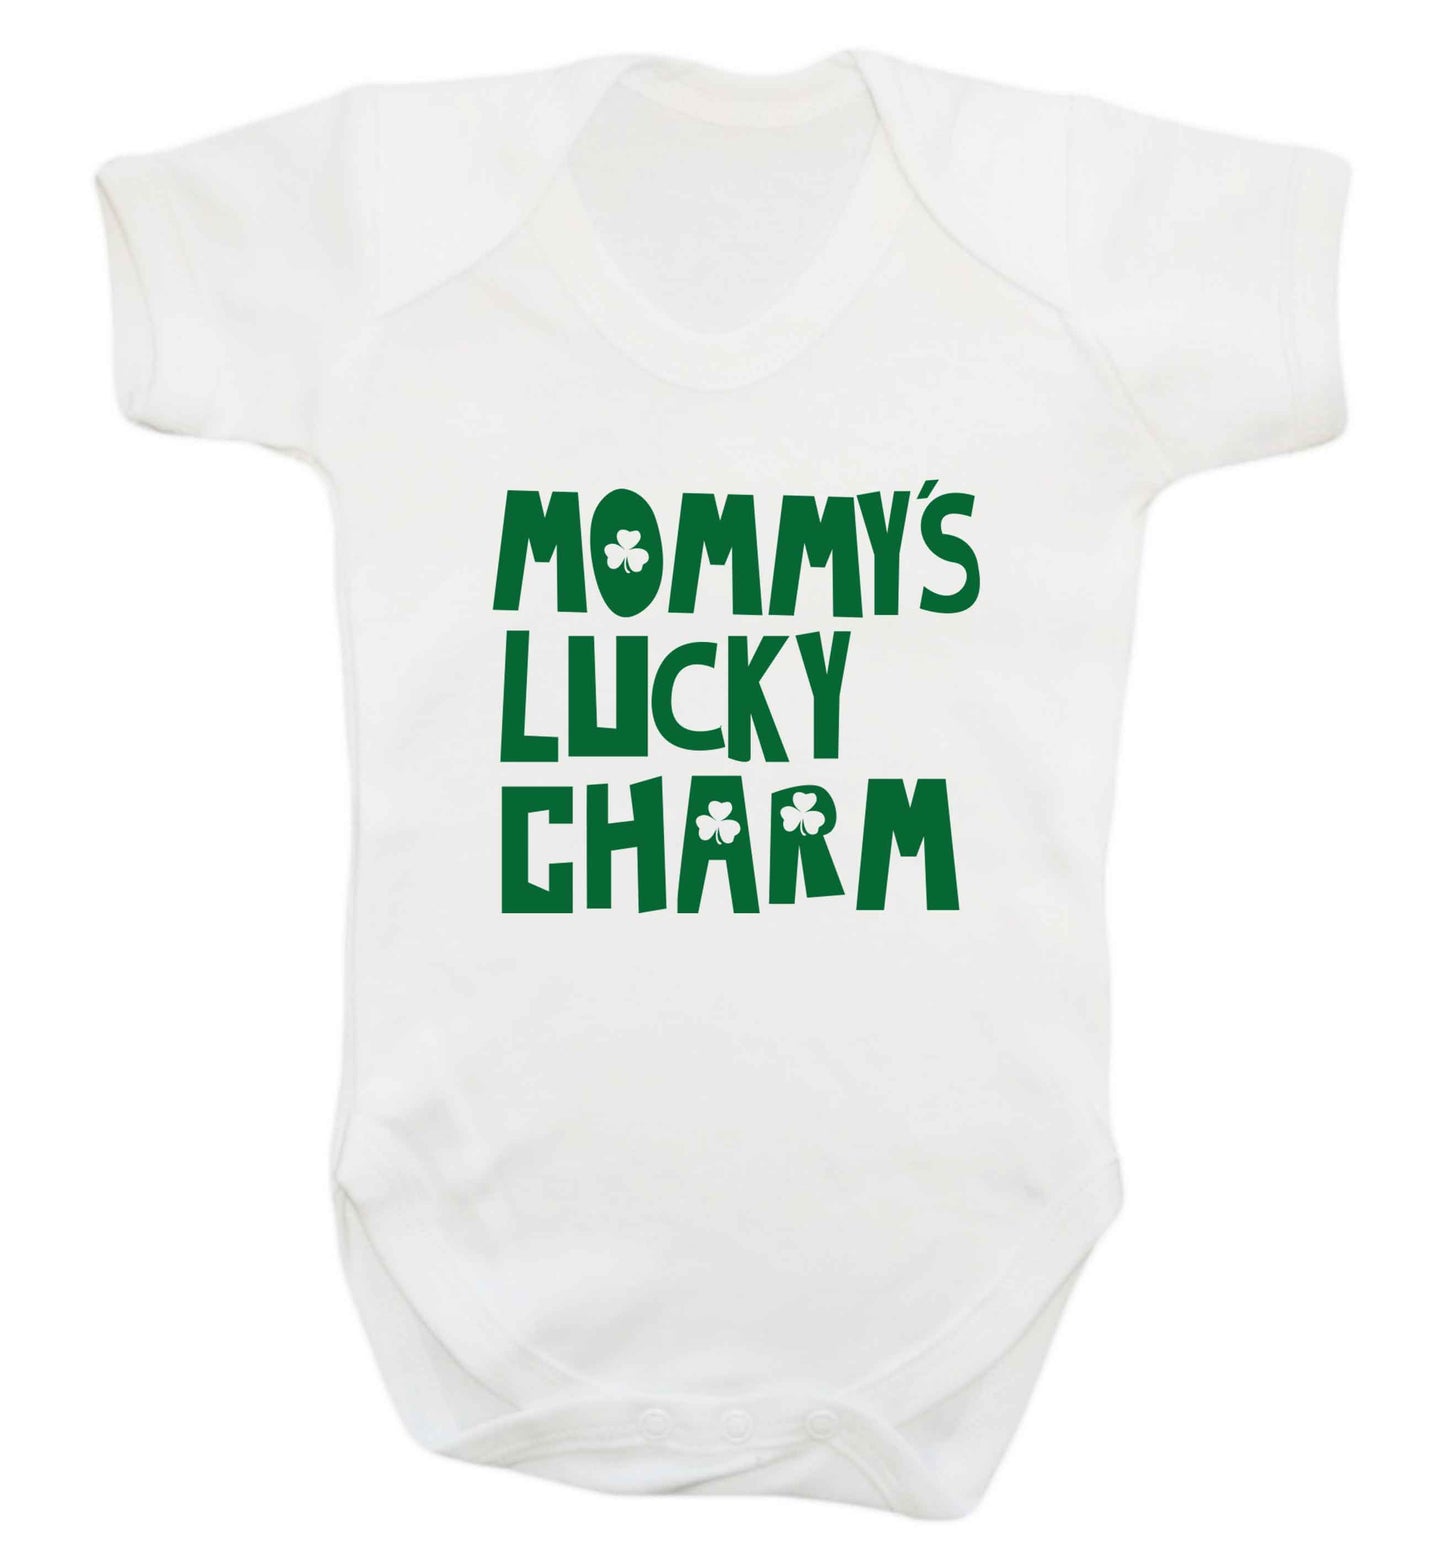 Mommy's lucky charm baby vest white 18-24 months